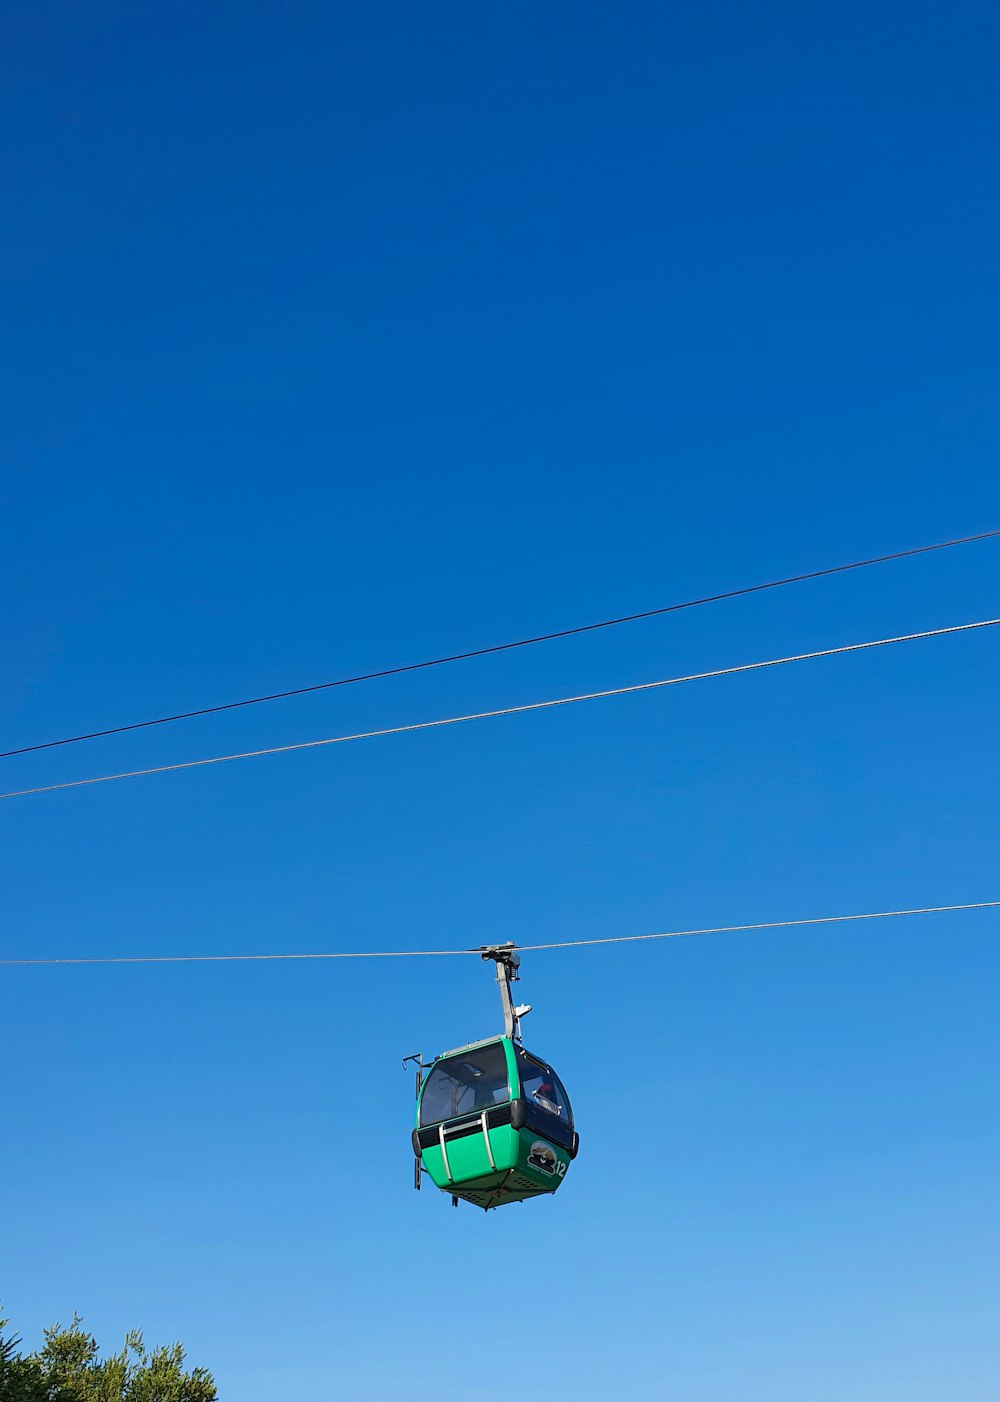 a person riding a ski lift on a clear day